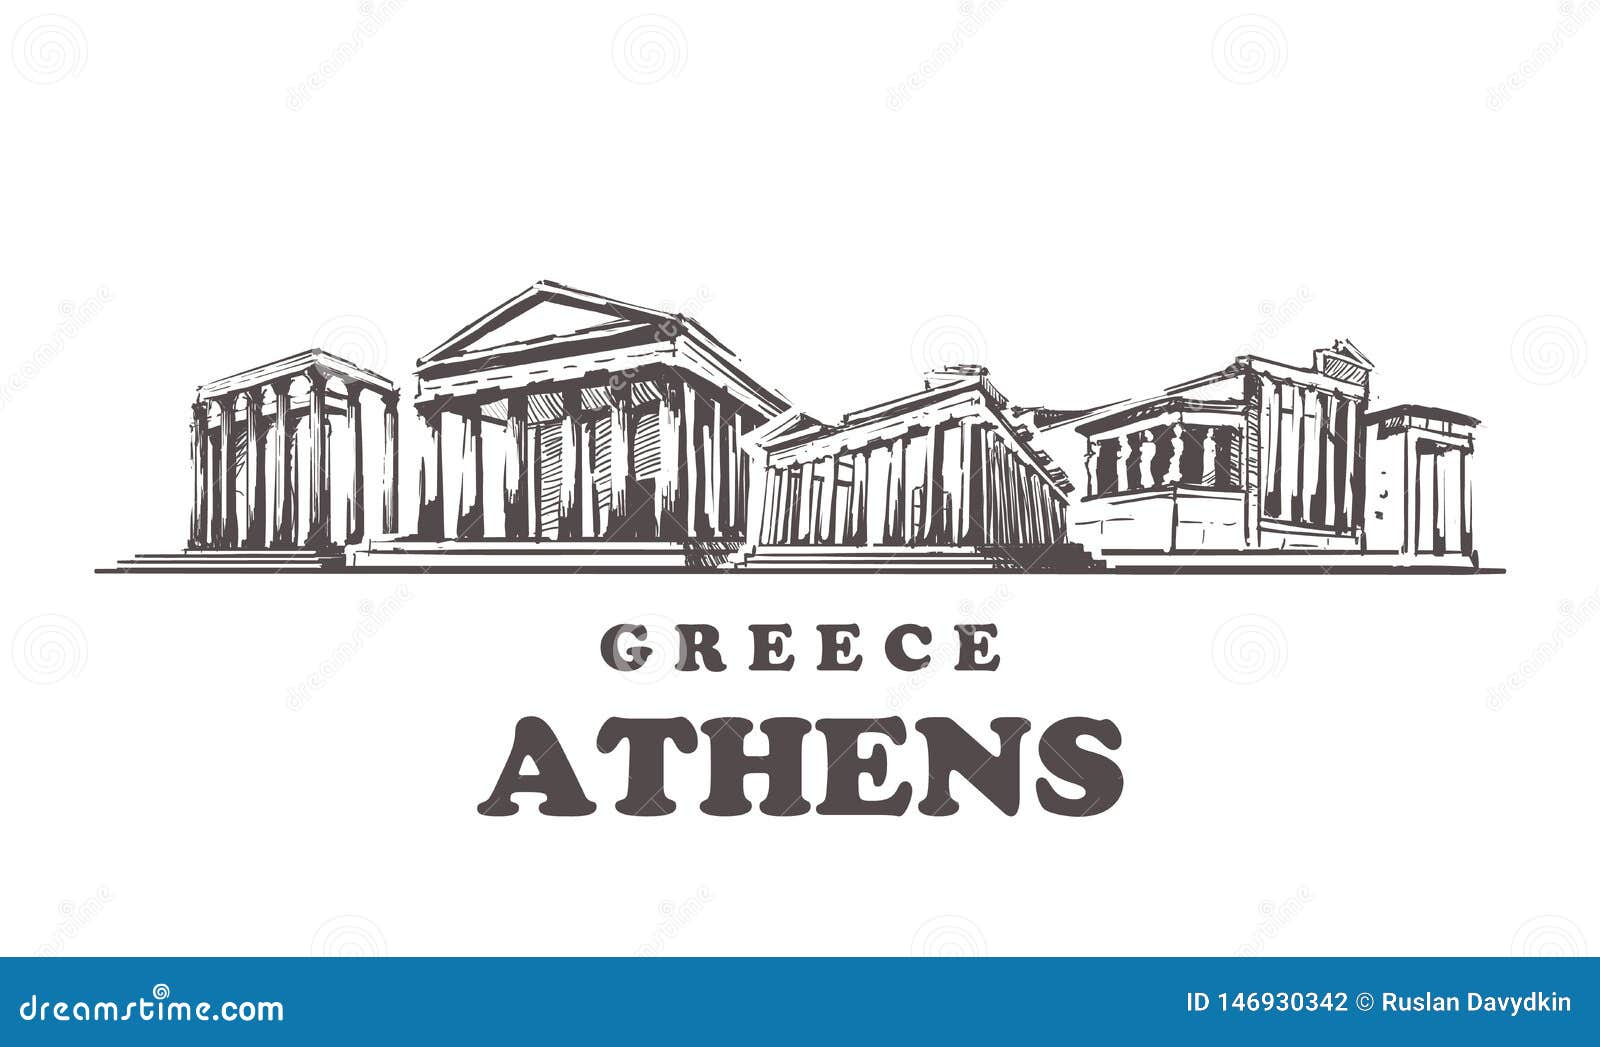 Athens Greece famous temple sketch Stock Vector by mailhebstreitcom  177294540